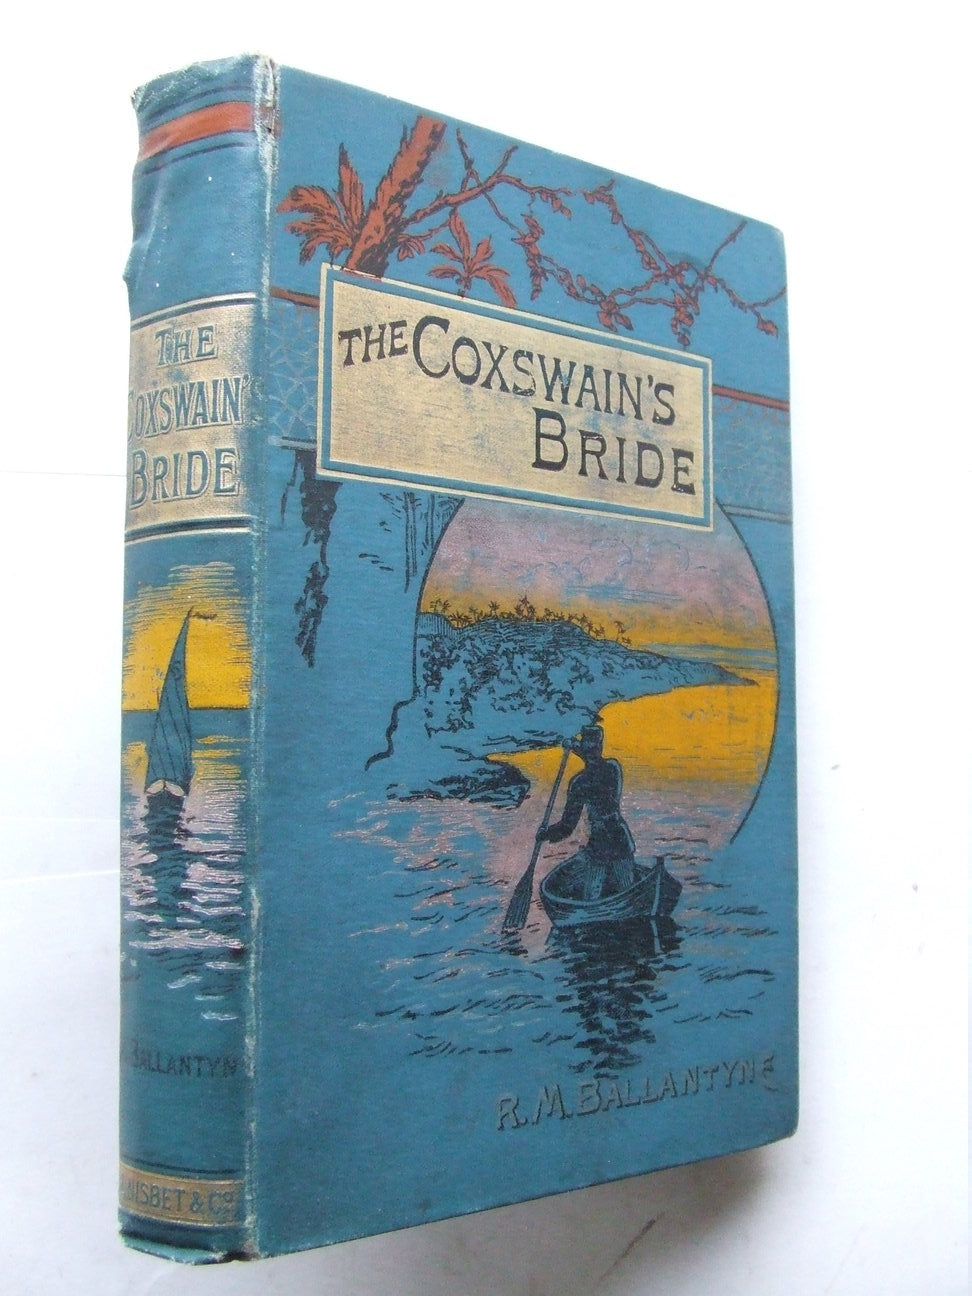 The Coxswain's Bride or the Rising Tide, a tale of the sea